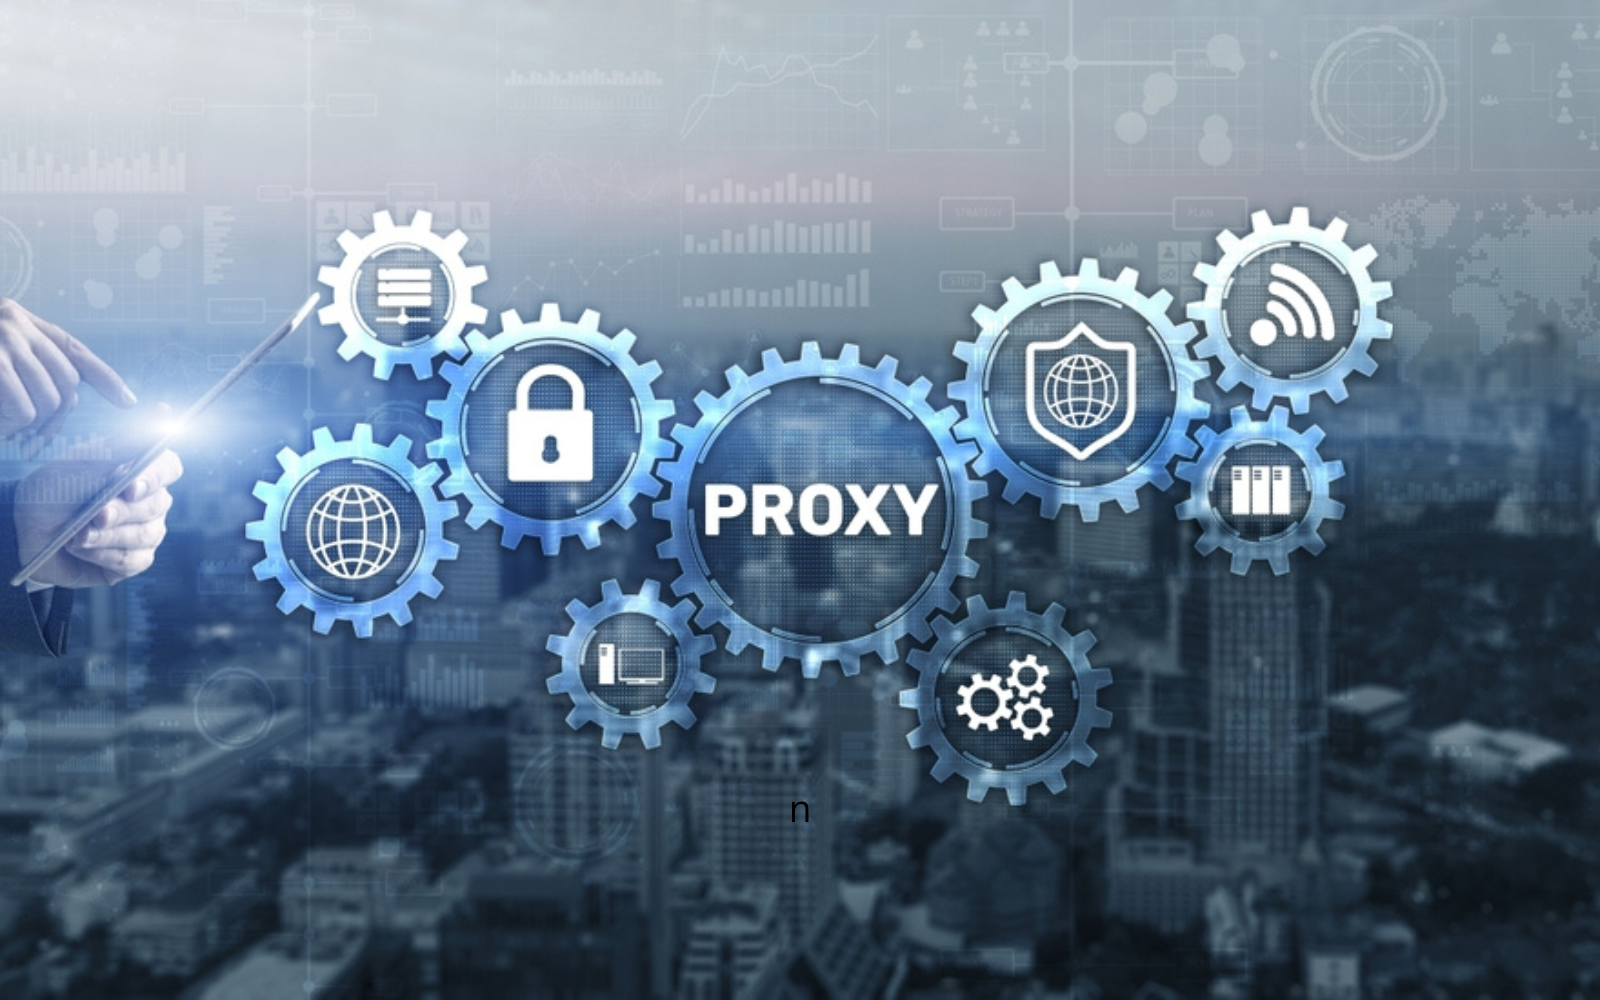 Google Testing IP Proxies: What This Means & How You May Be Impacted